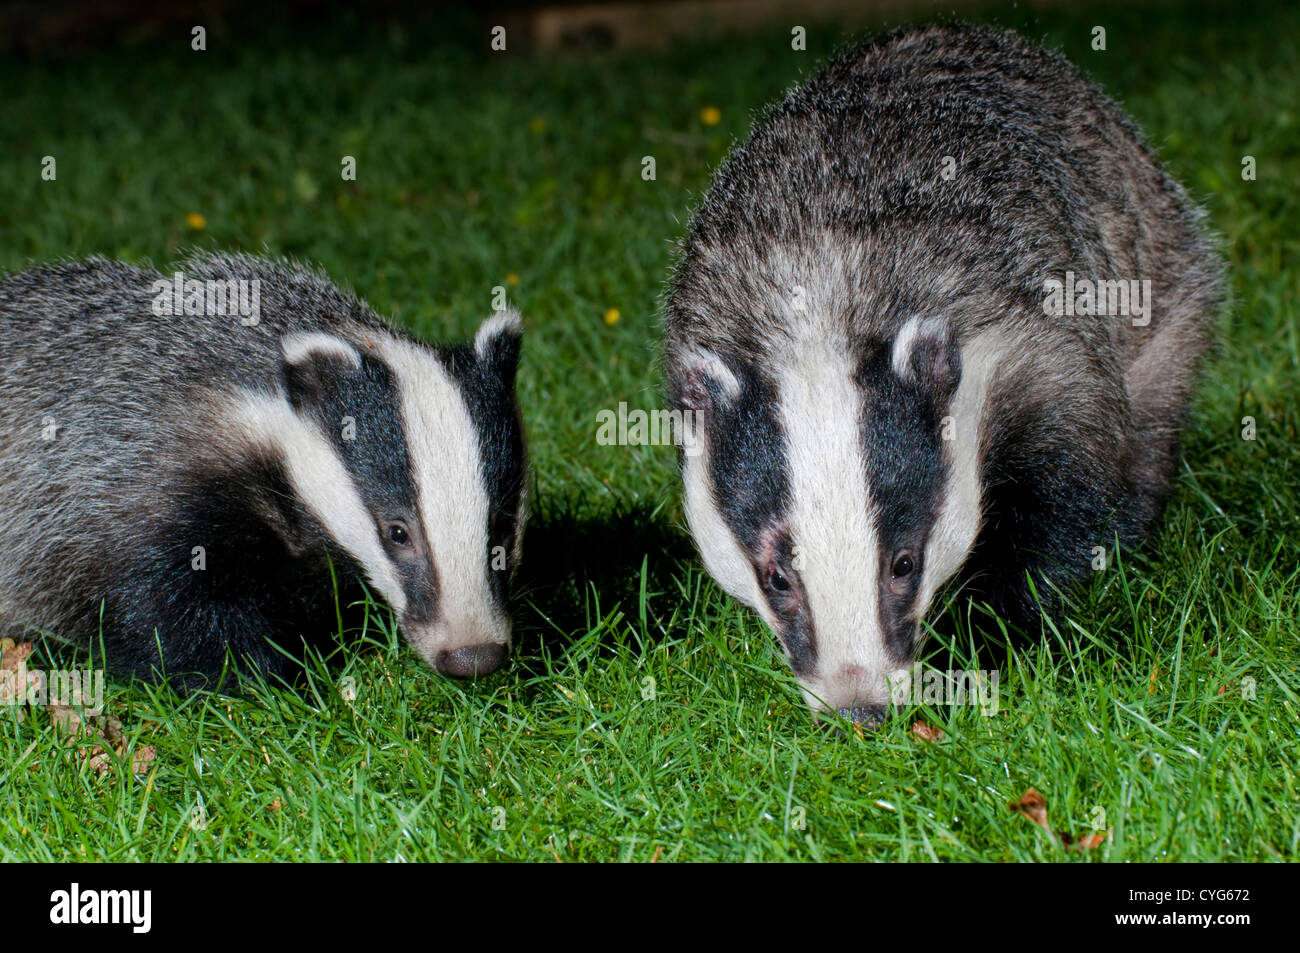 A eurasian badger (Meles meles) mother and cub search for food on a suburban garden lawn at night Stock Photo